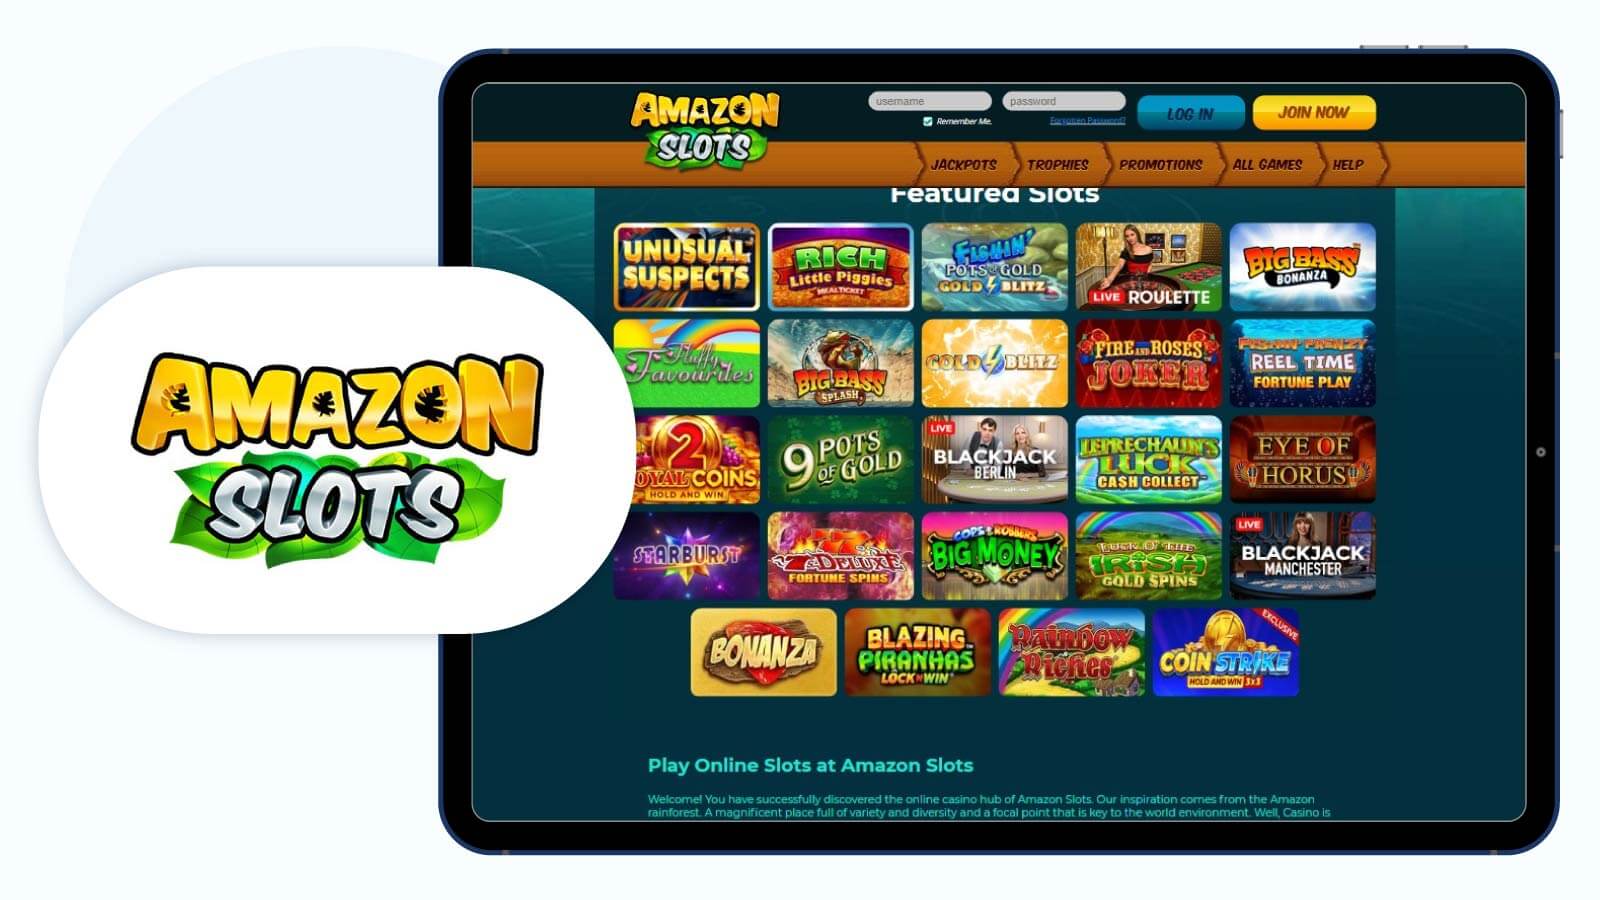 Amazon Slots: Top Microgaming Casino for Biggest Number of Slot Games